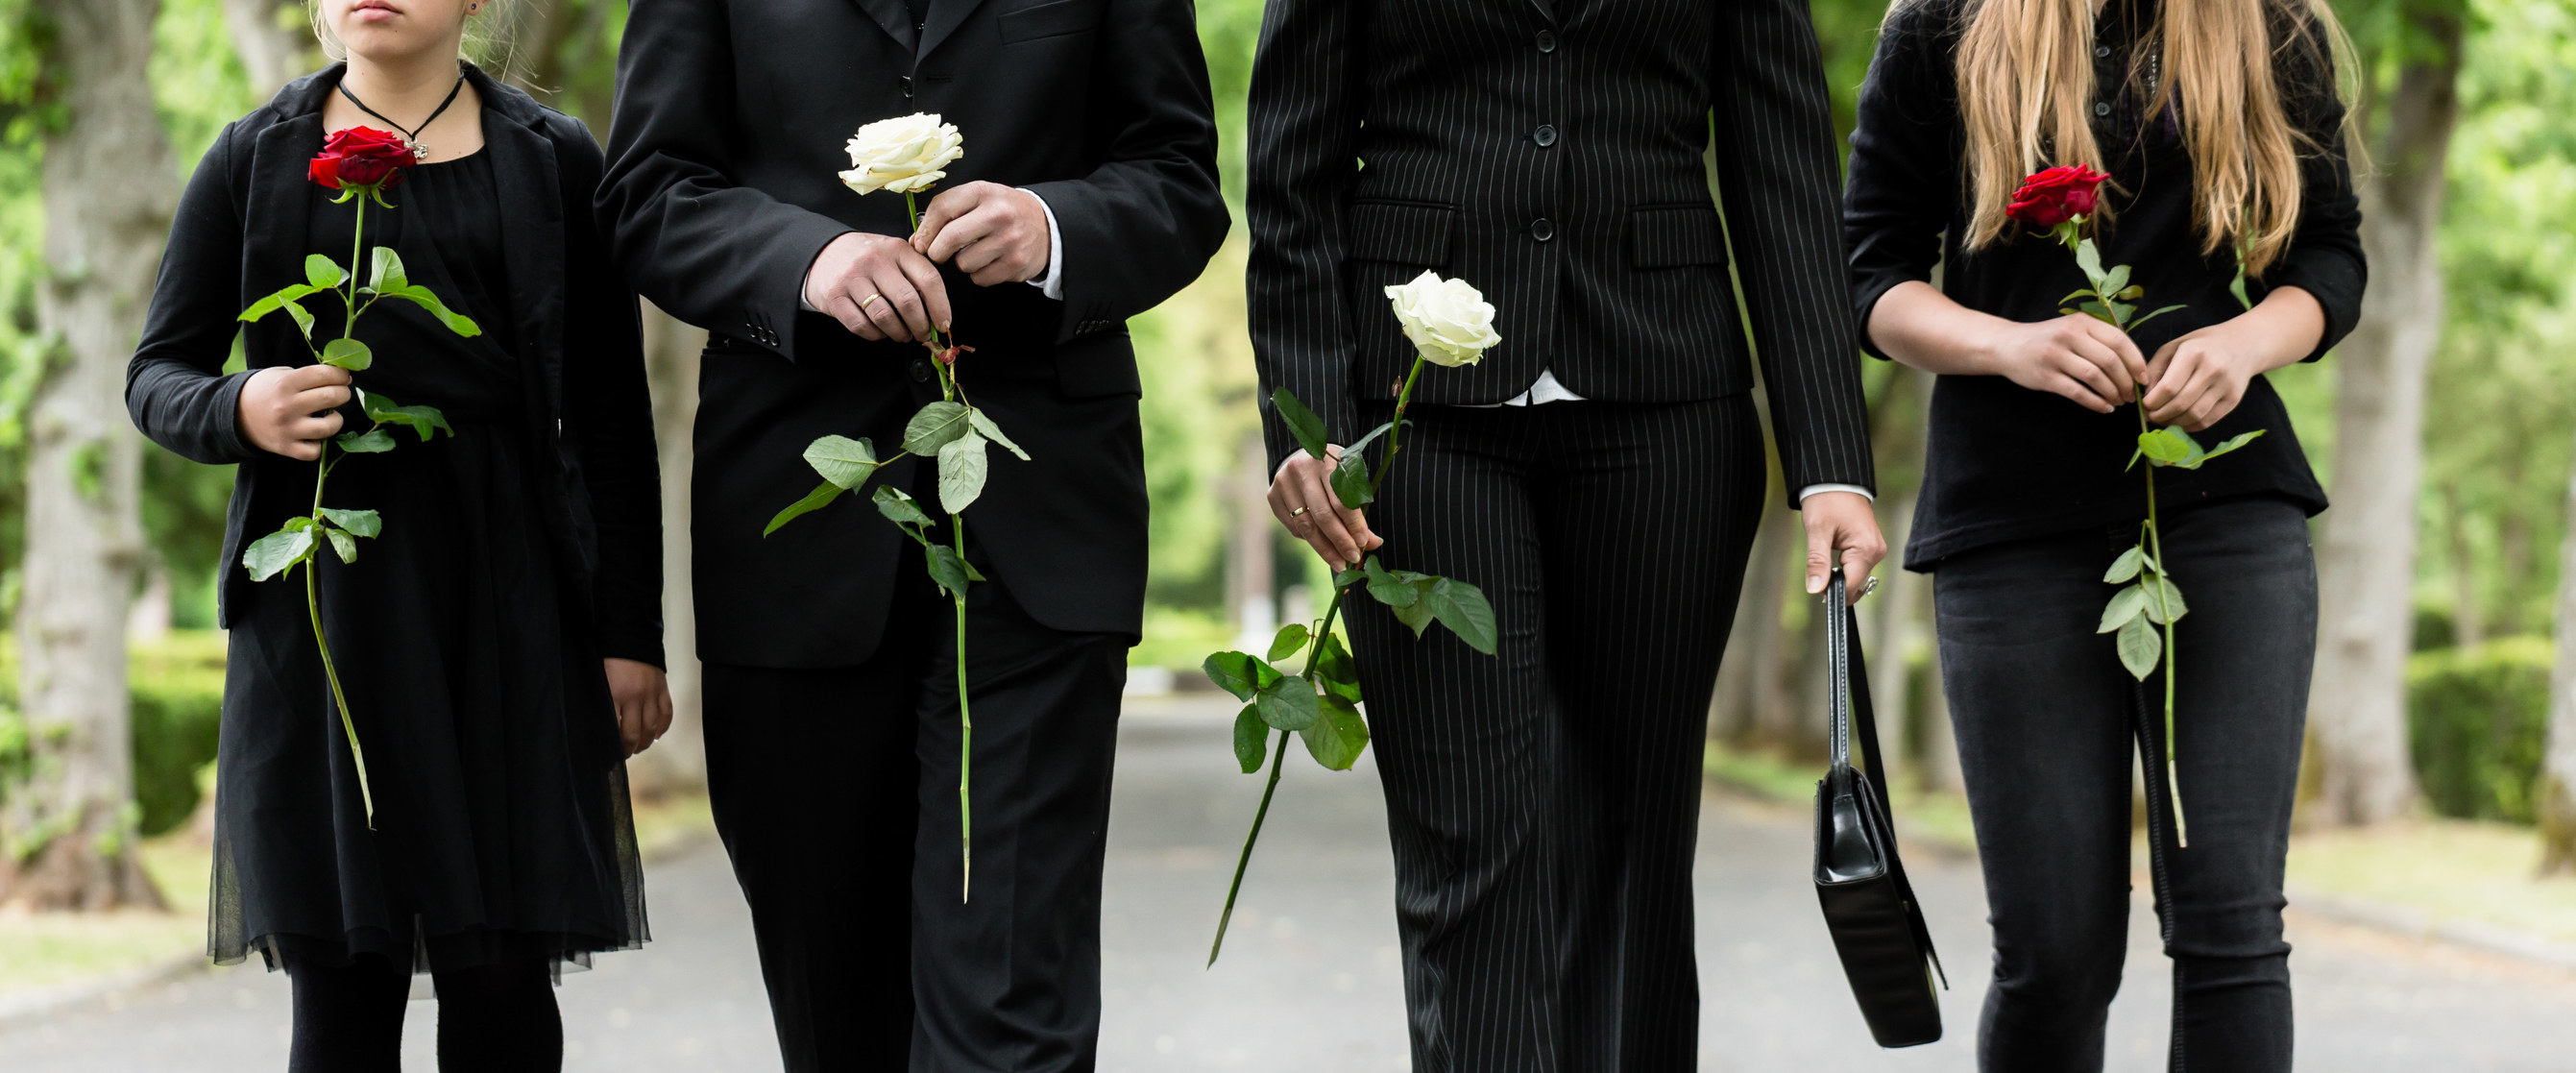 people dressed in black each carrying a single rose